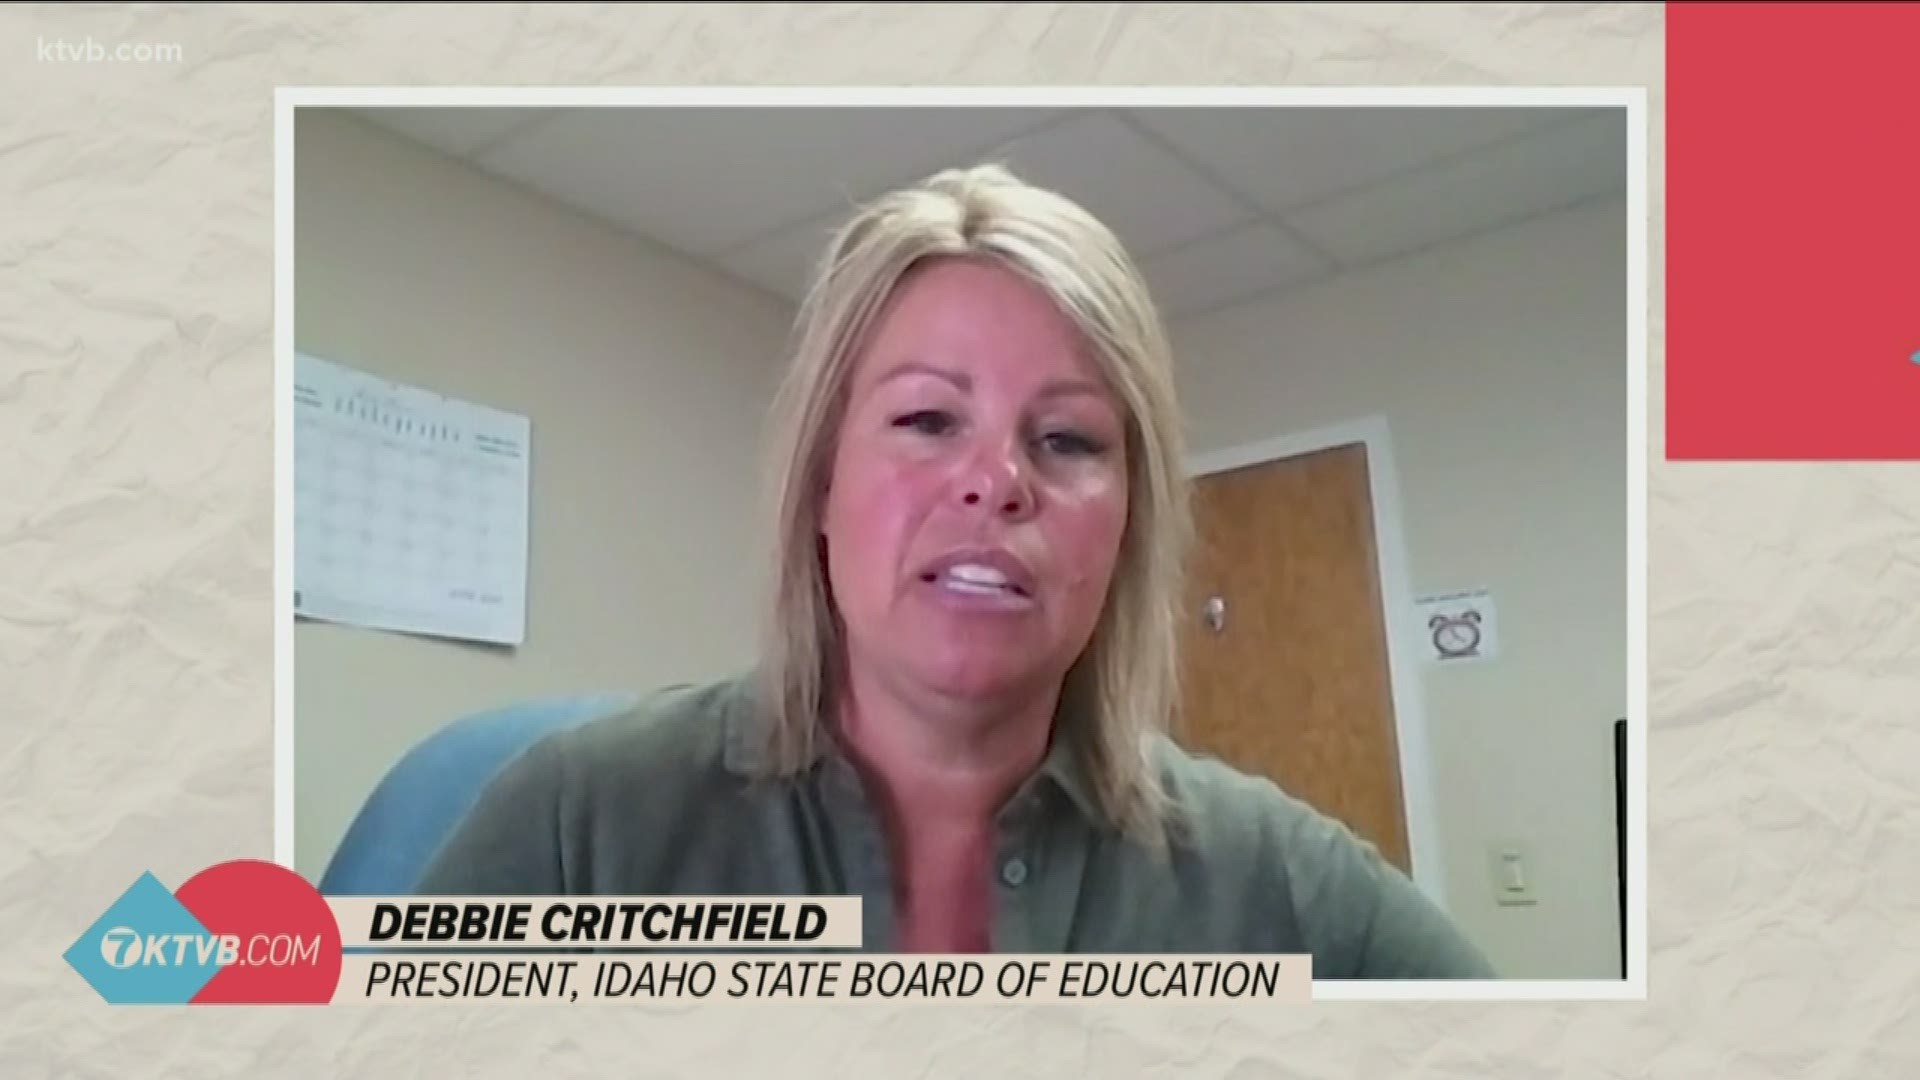 Kim Fields spoke with state board president Debbie Critchfield about what parents and students can expect when public schools open next month.